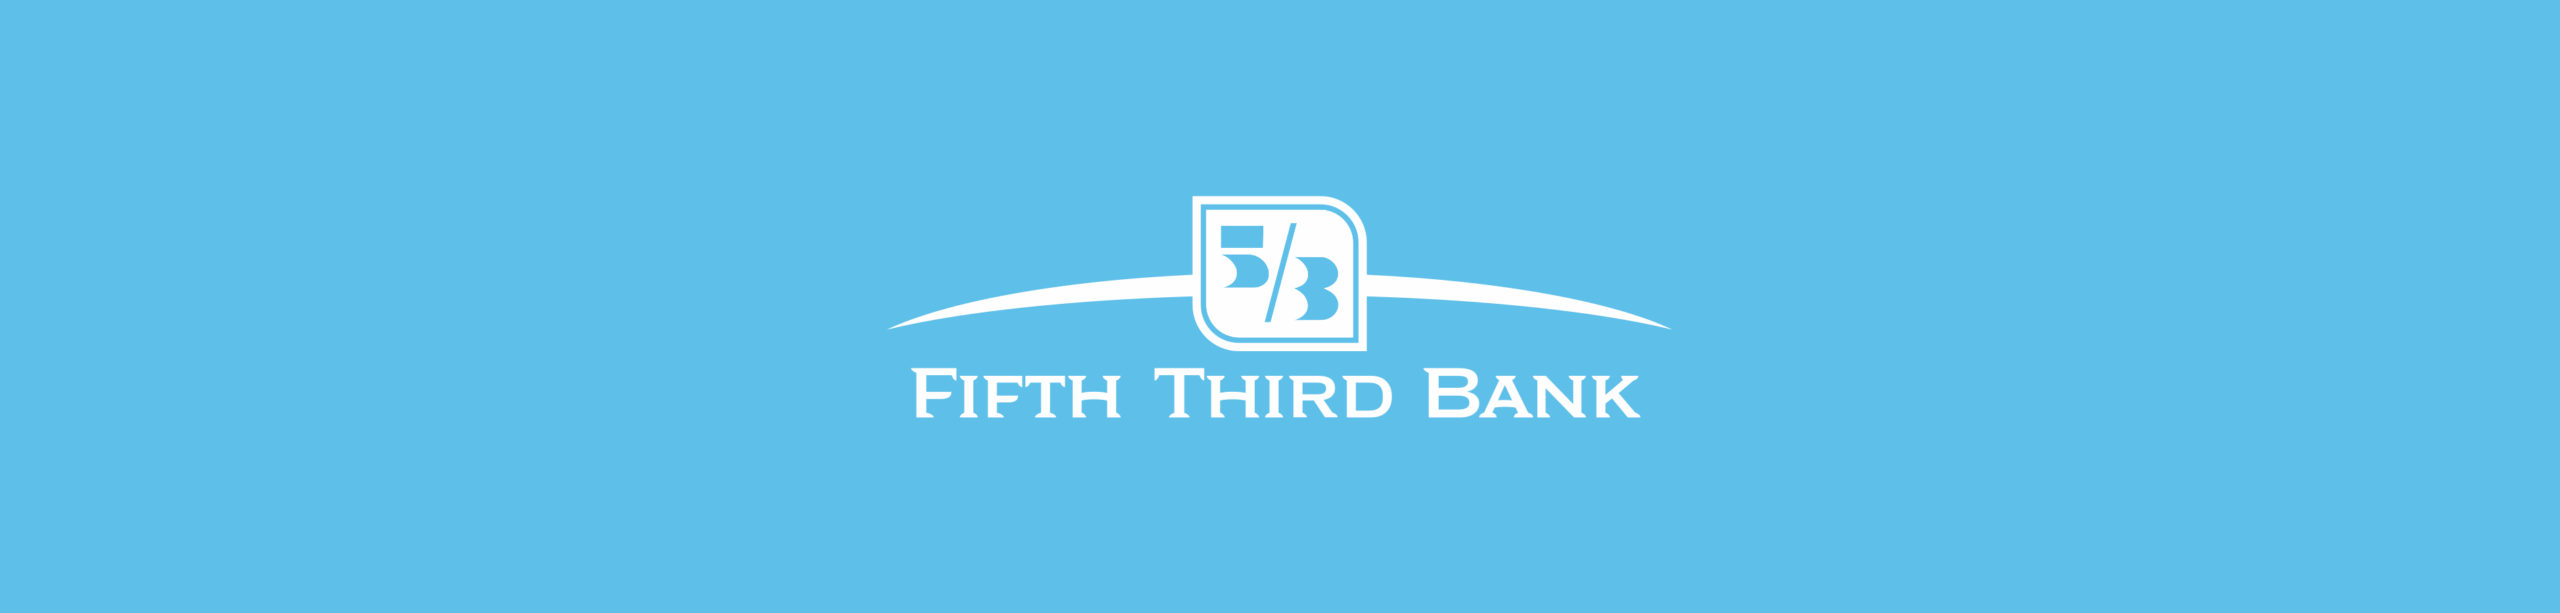 Fifth Third Bank and Fifth Third Foundation